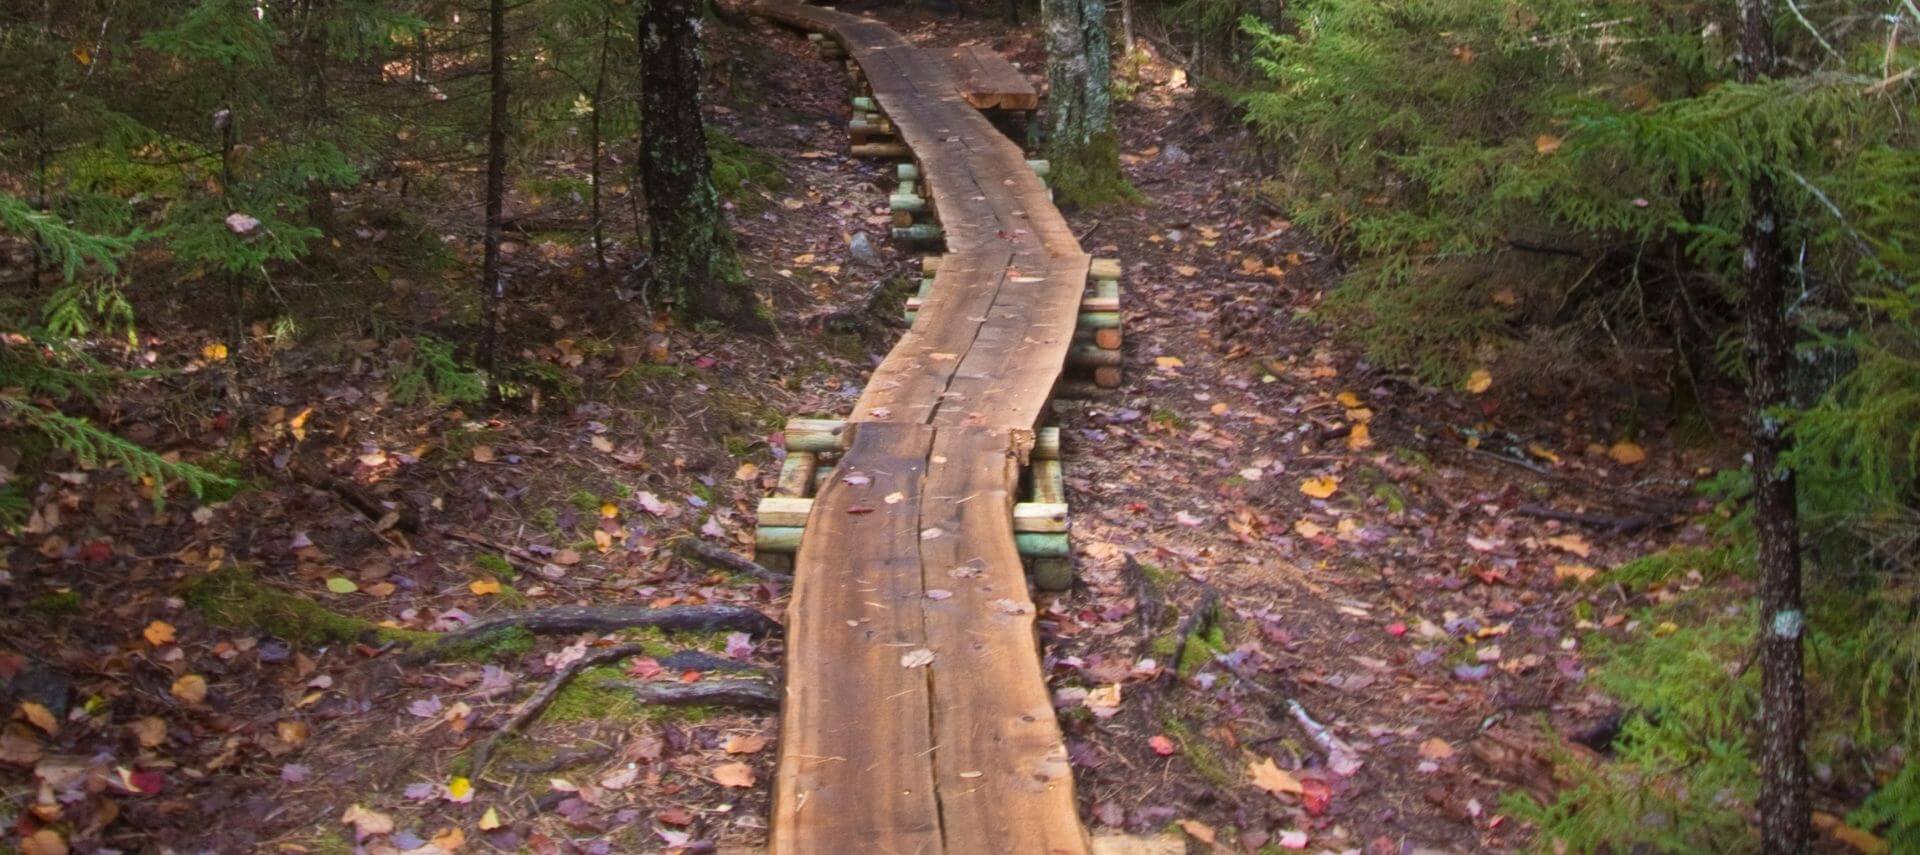 Walking trail through forest in Maine USA